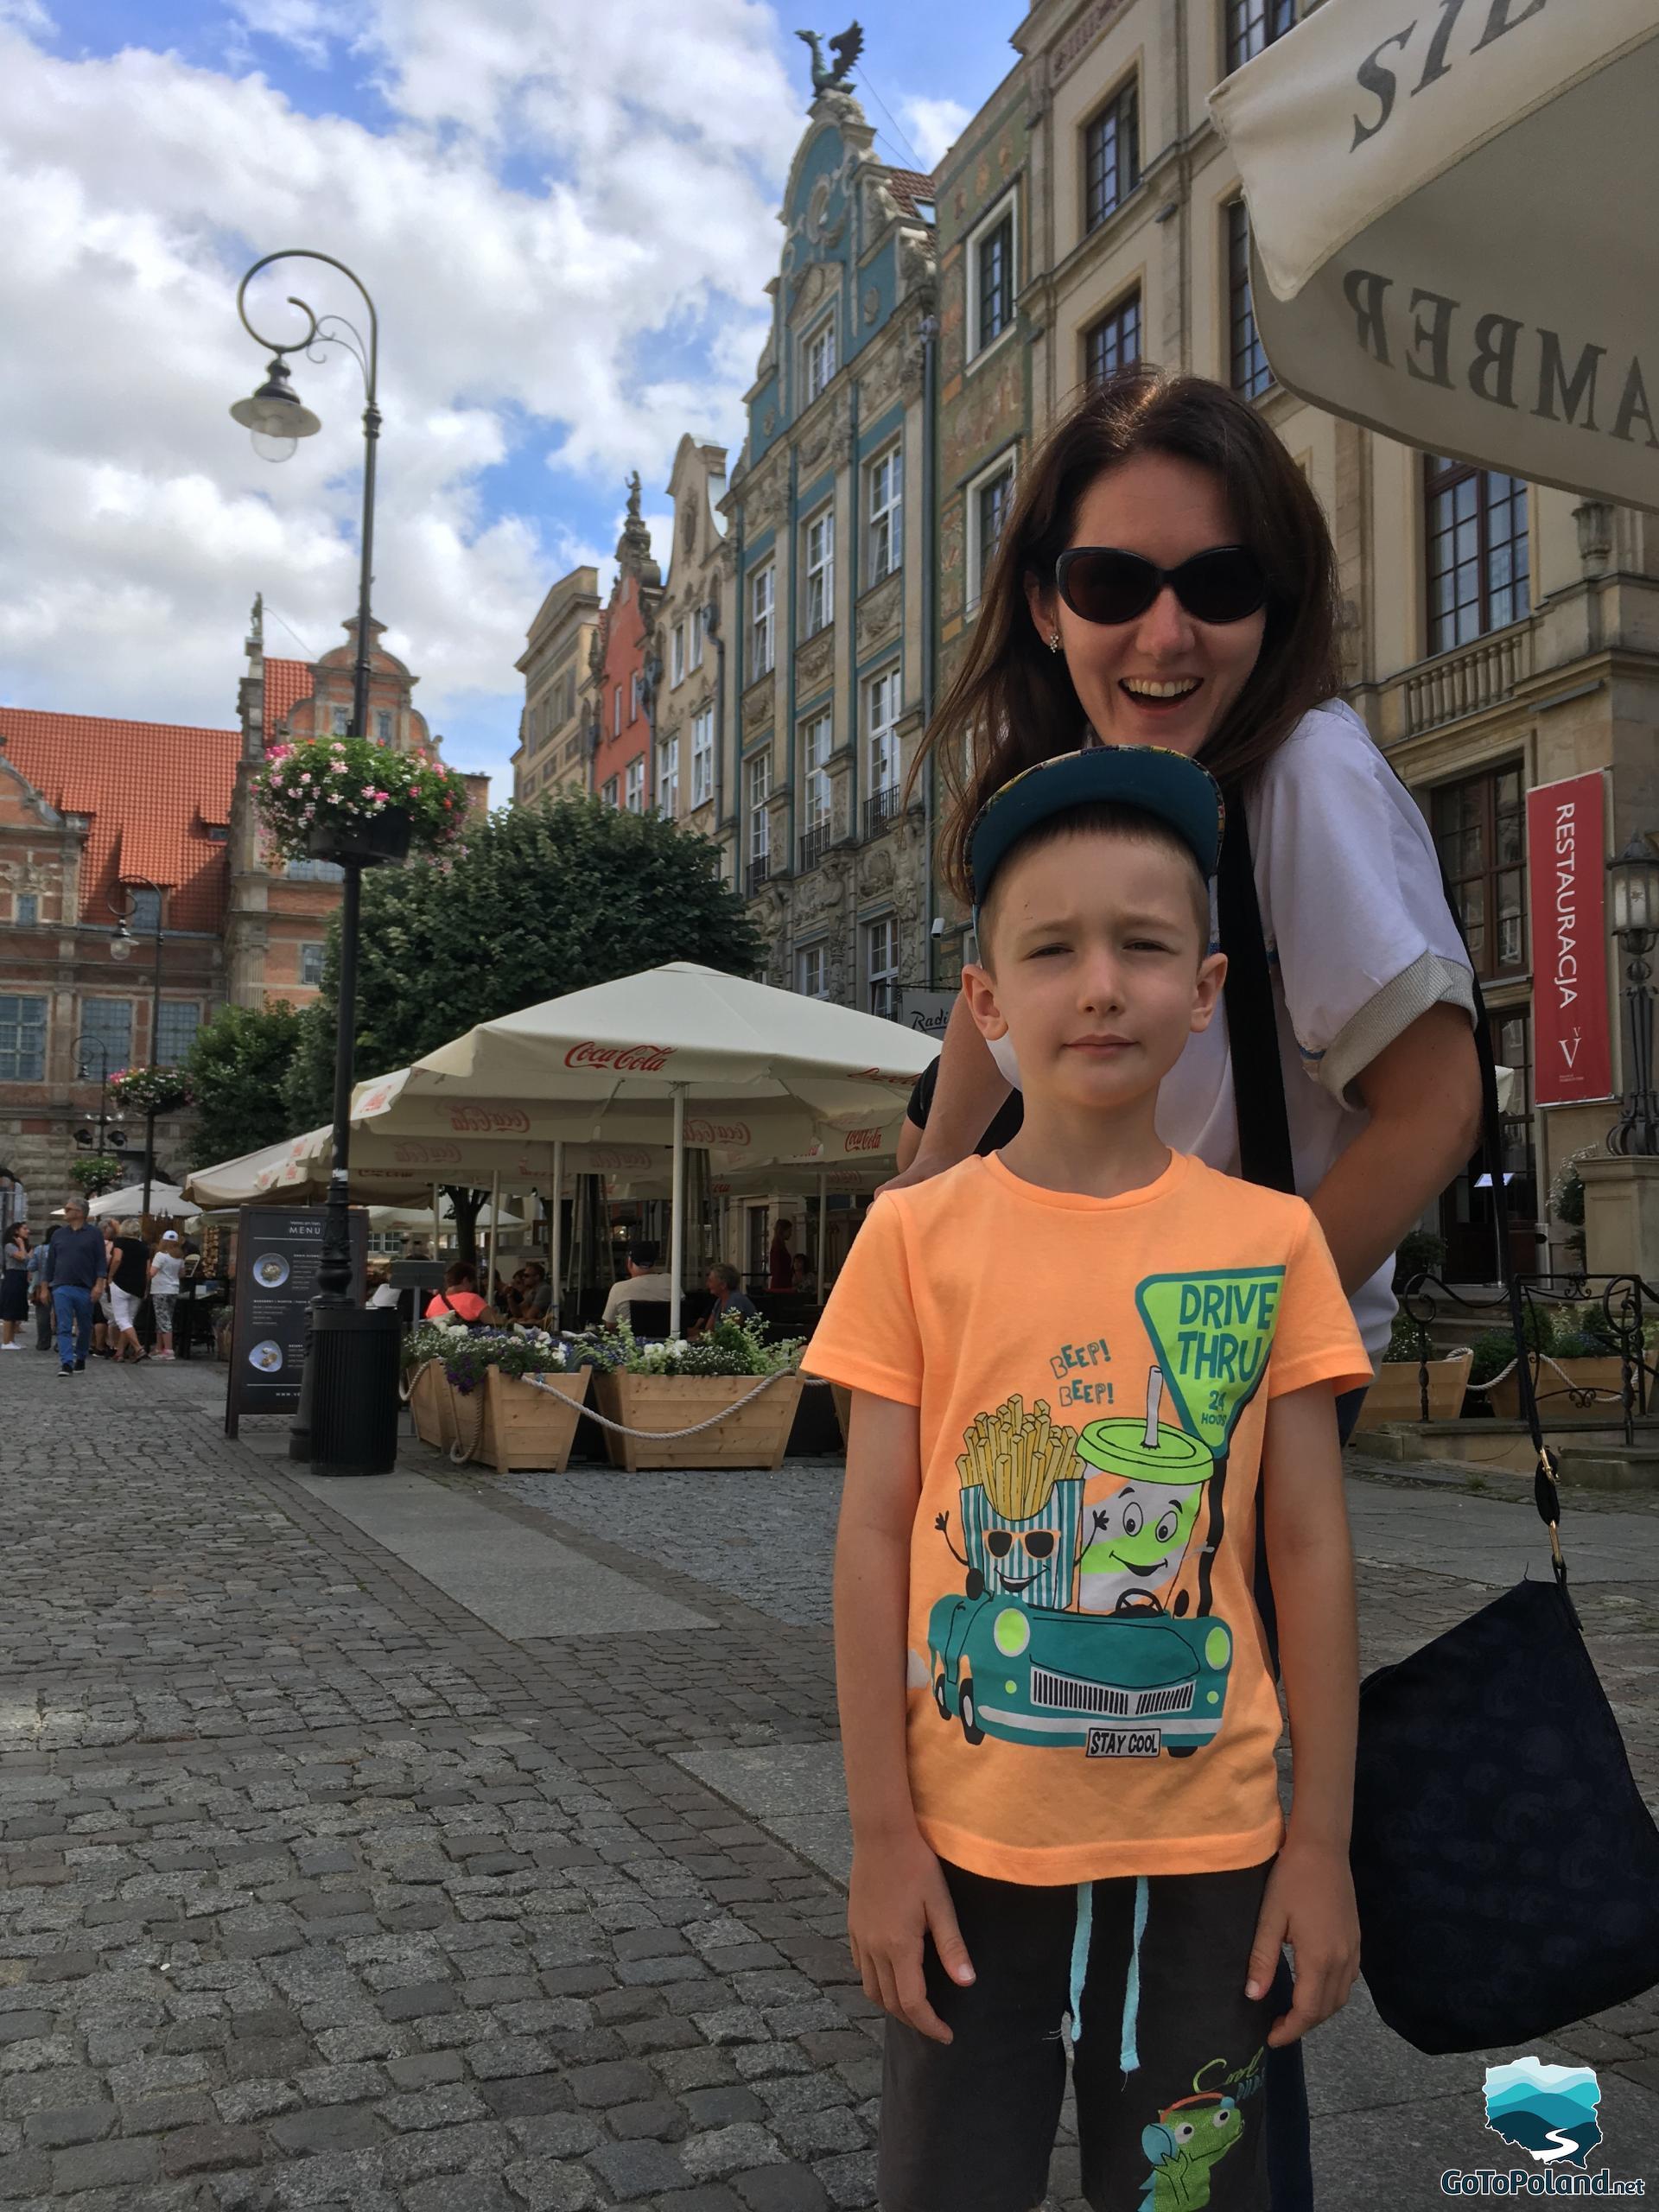 A woman and a boy are standing on the street of the old town, tenement houses and many tourists around them